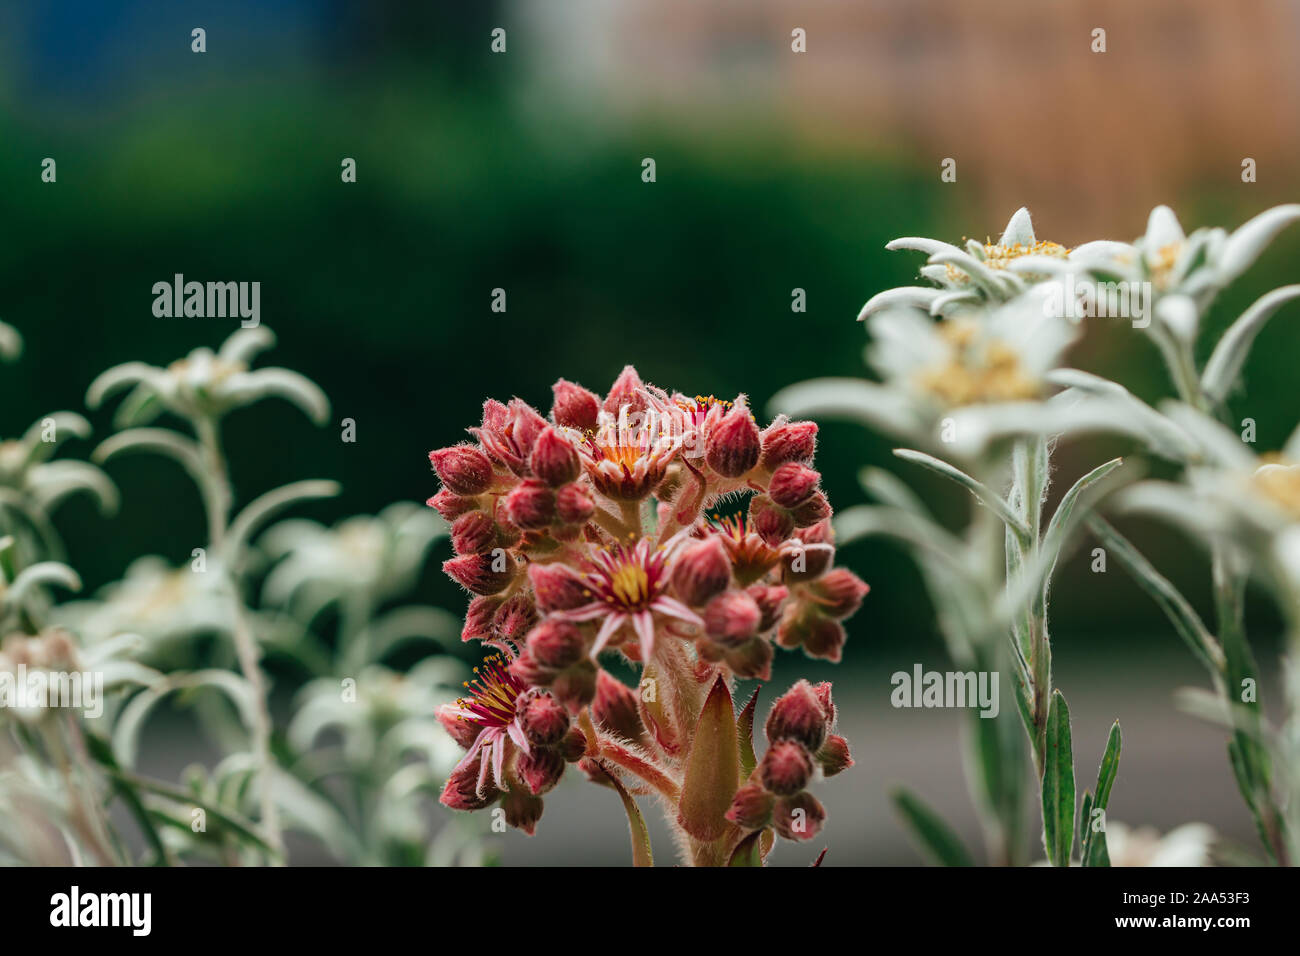 Beautiful Floral flower sempervivum or liveforever blossoming next to white shining edelweiss. Stock Photo